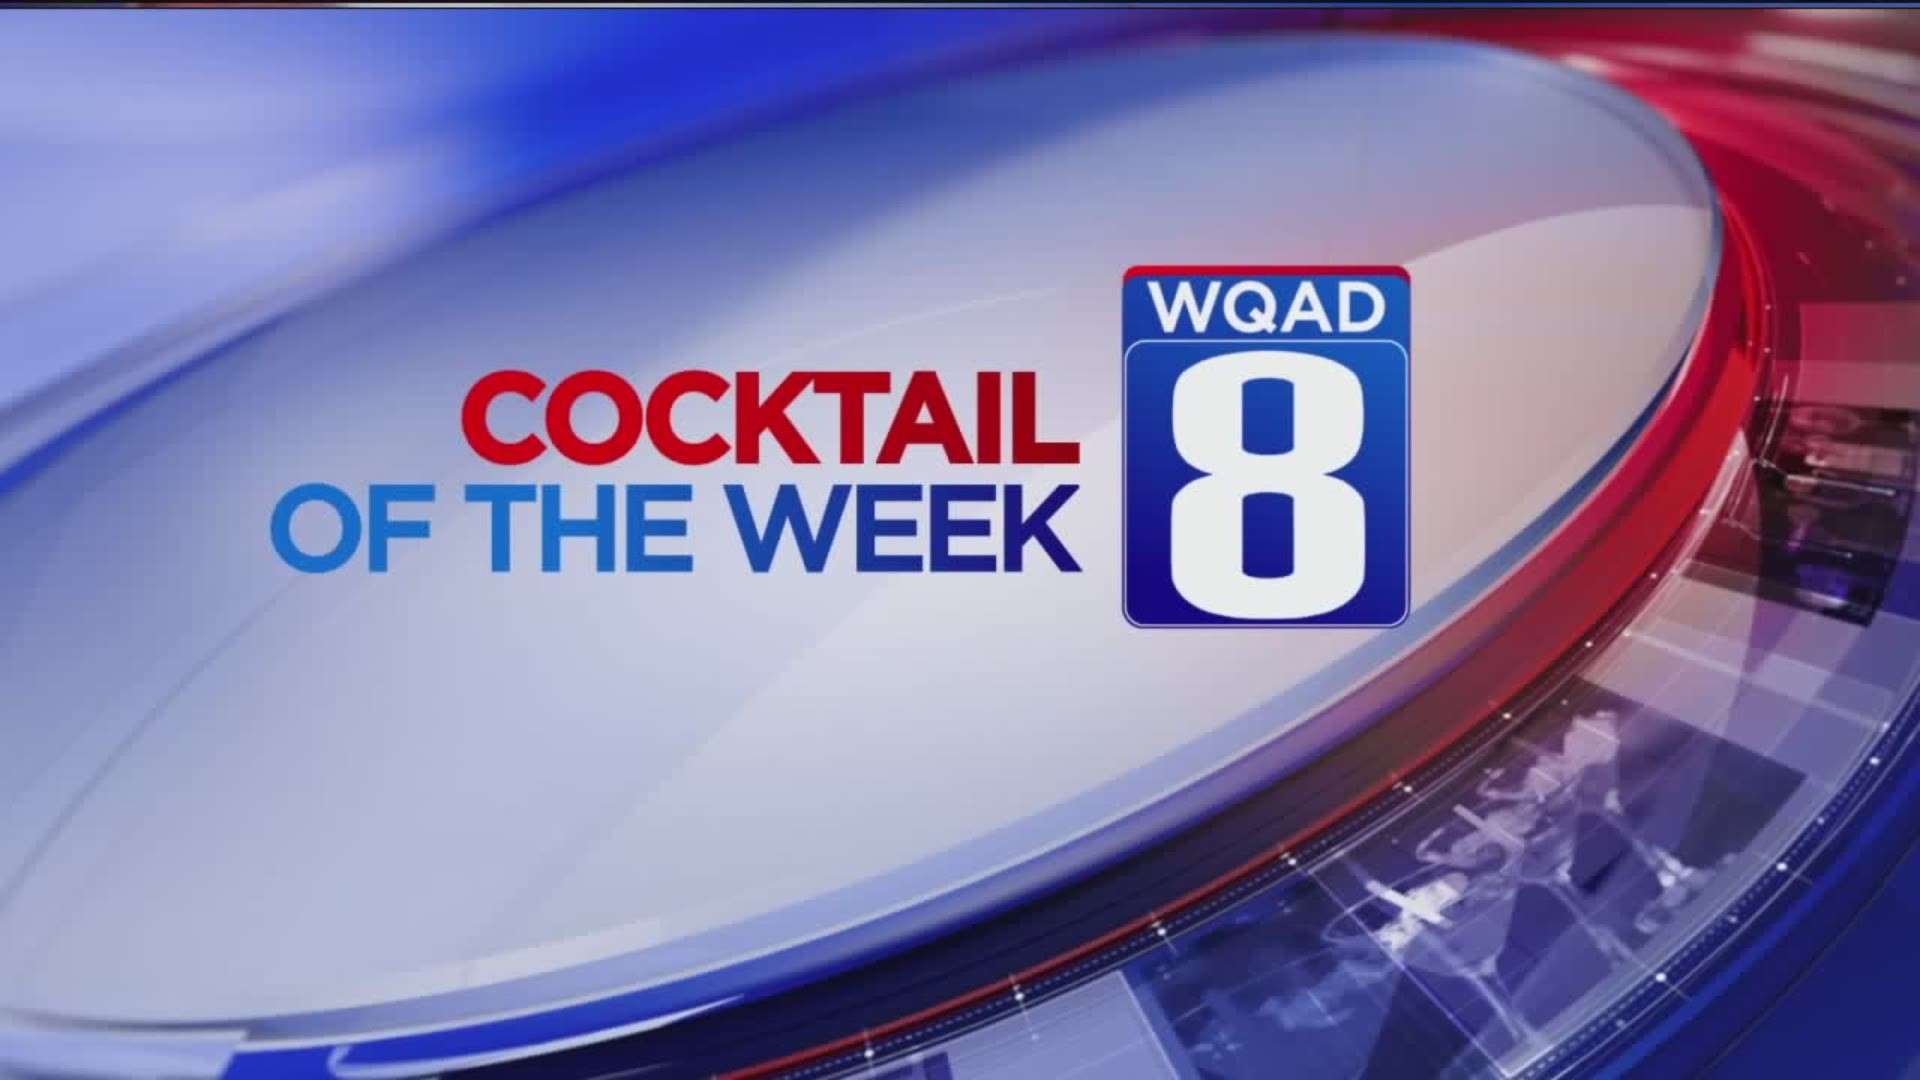 The Patio Sippin' Drink was phenomenal Friday during WQAD News 8 at 11.